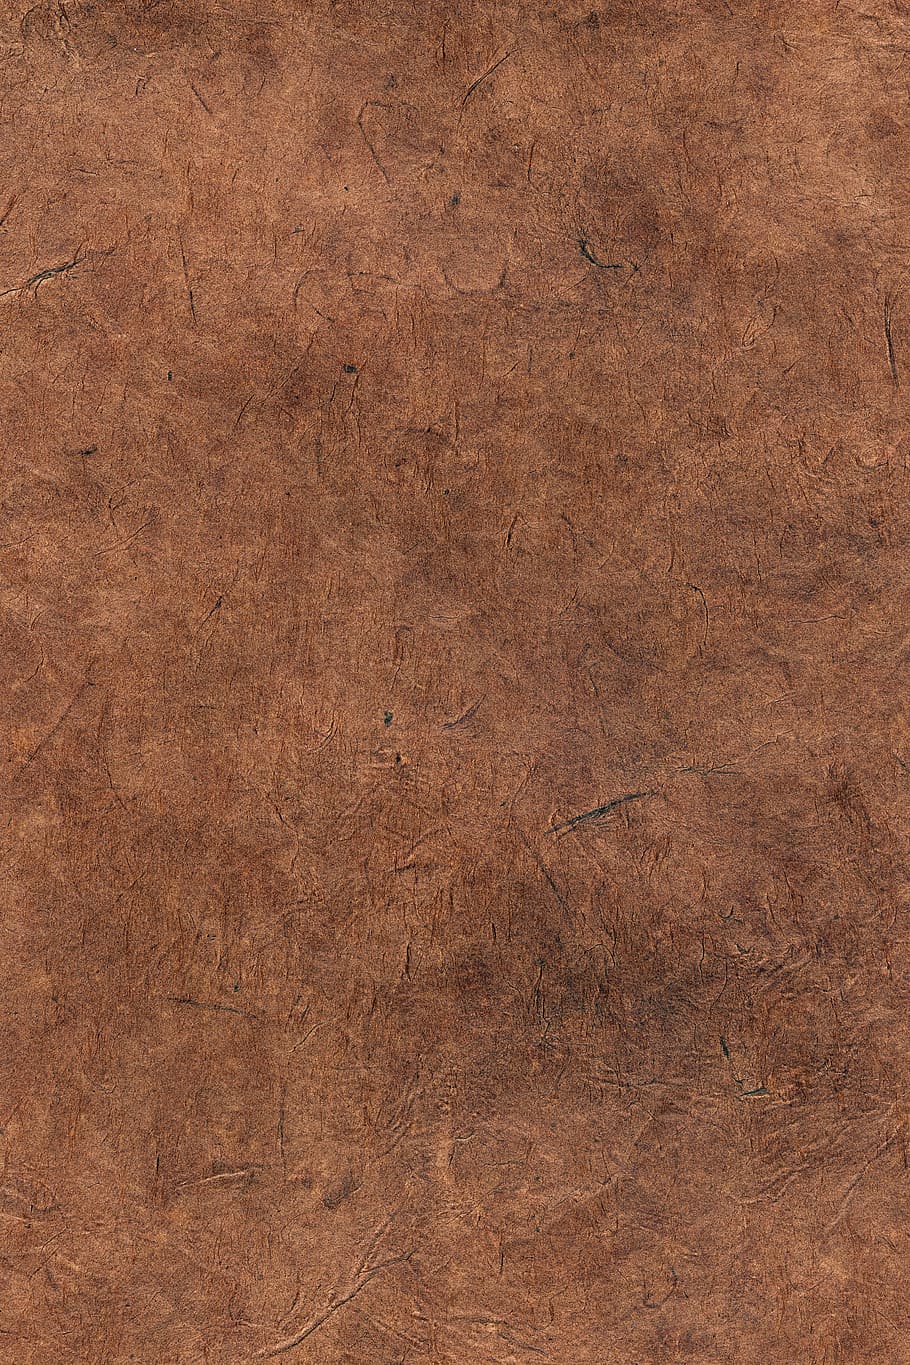 untitled, paper, brown, handmade, handmade paper, texture, papyrus, rau, parchment, structure